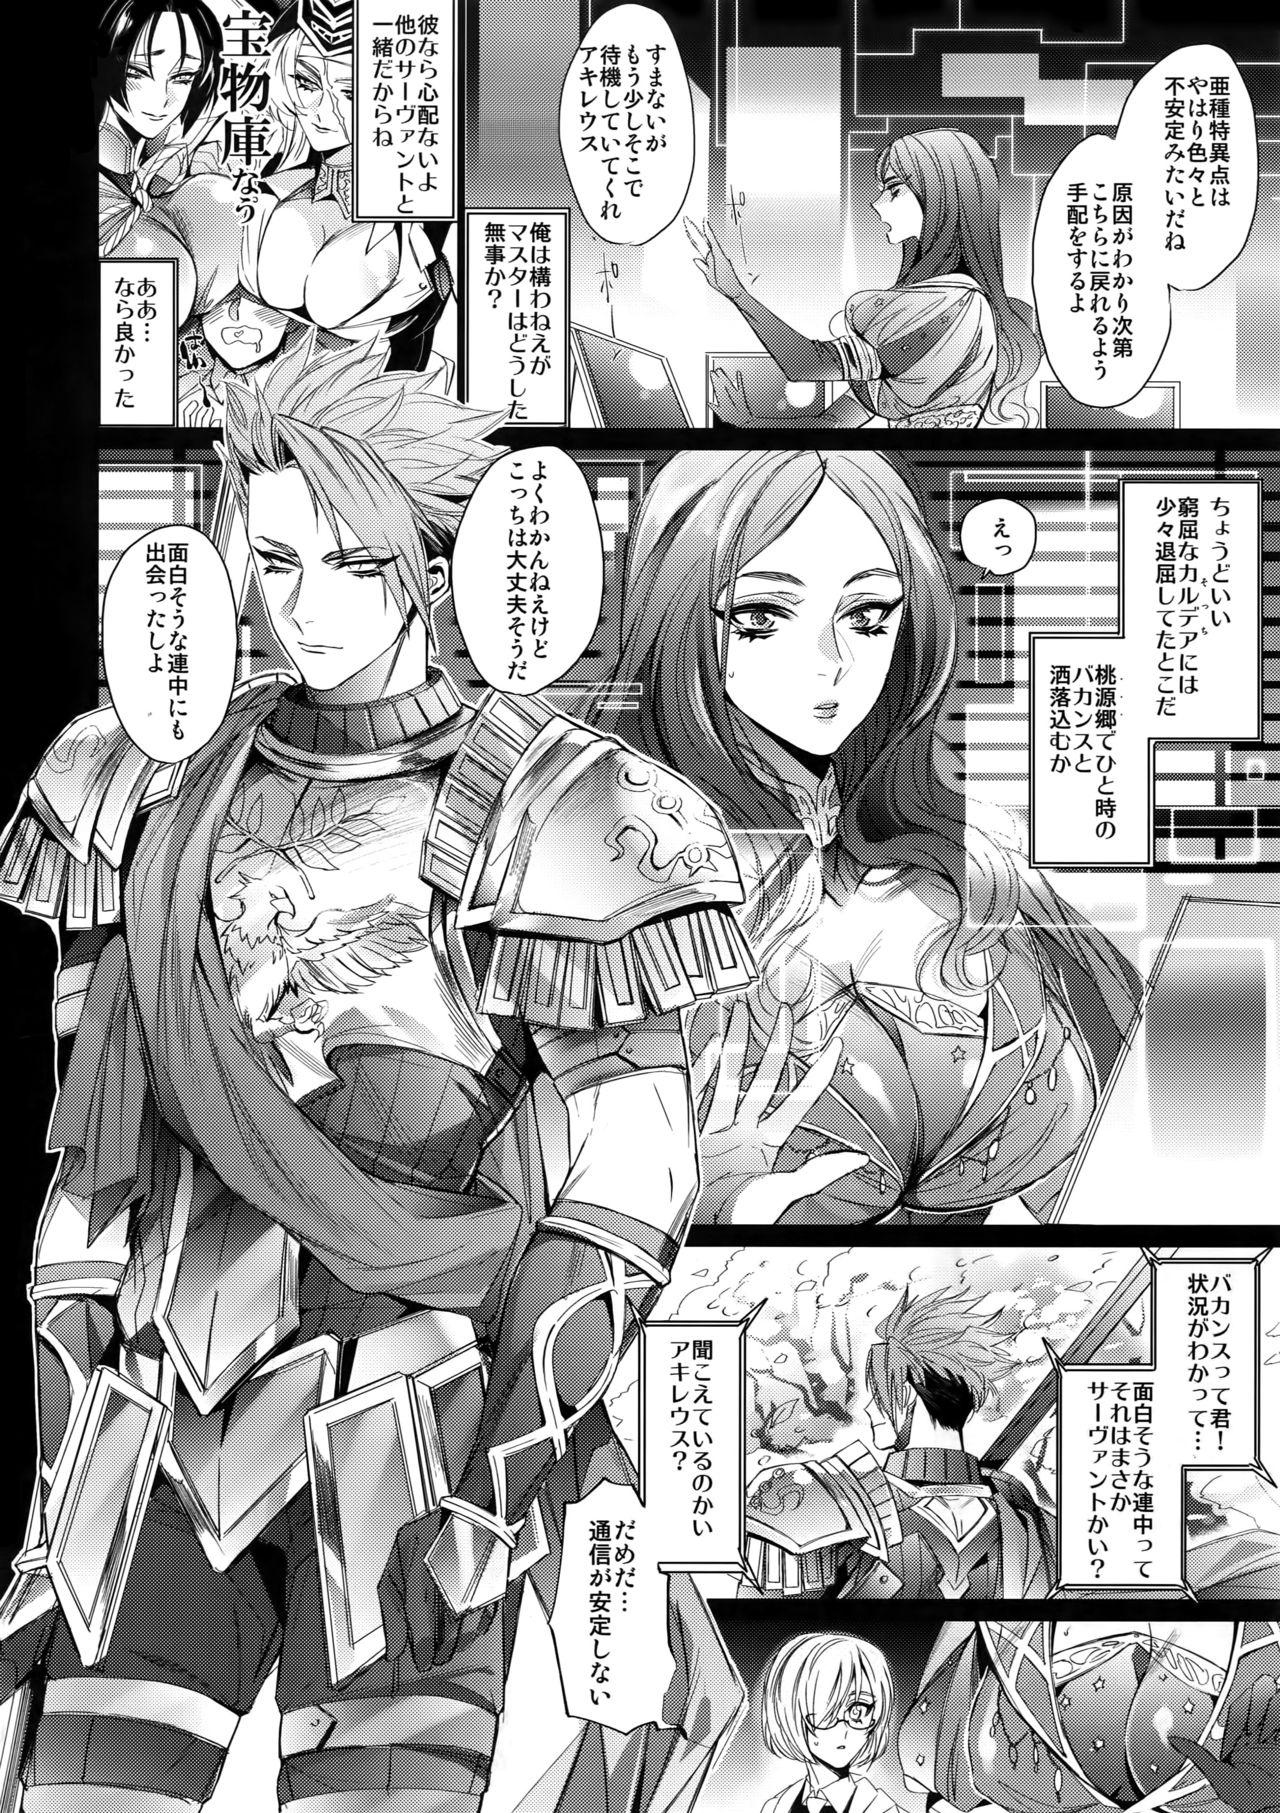 Fuck Com From Dusk Till The End - Fate grand order Assfingering - Page 3